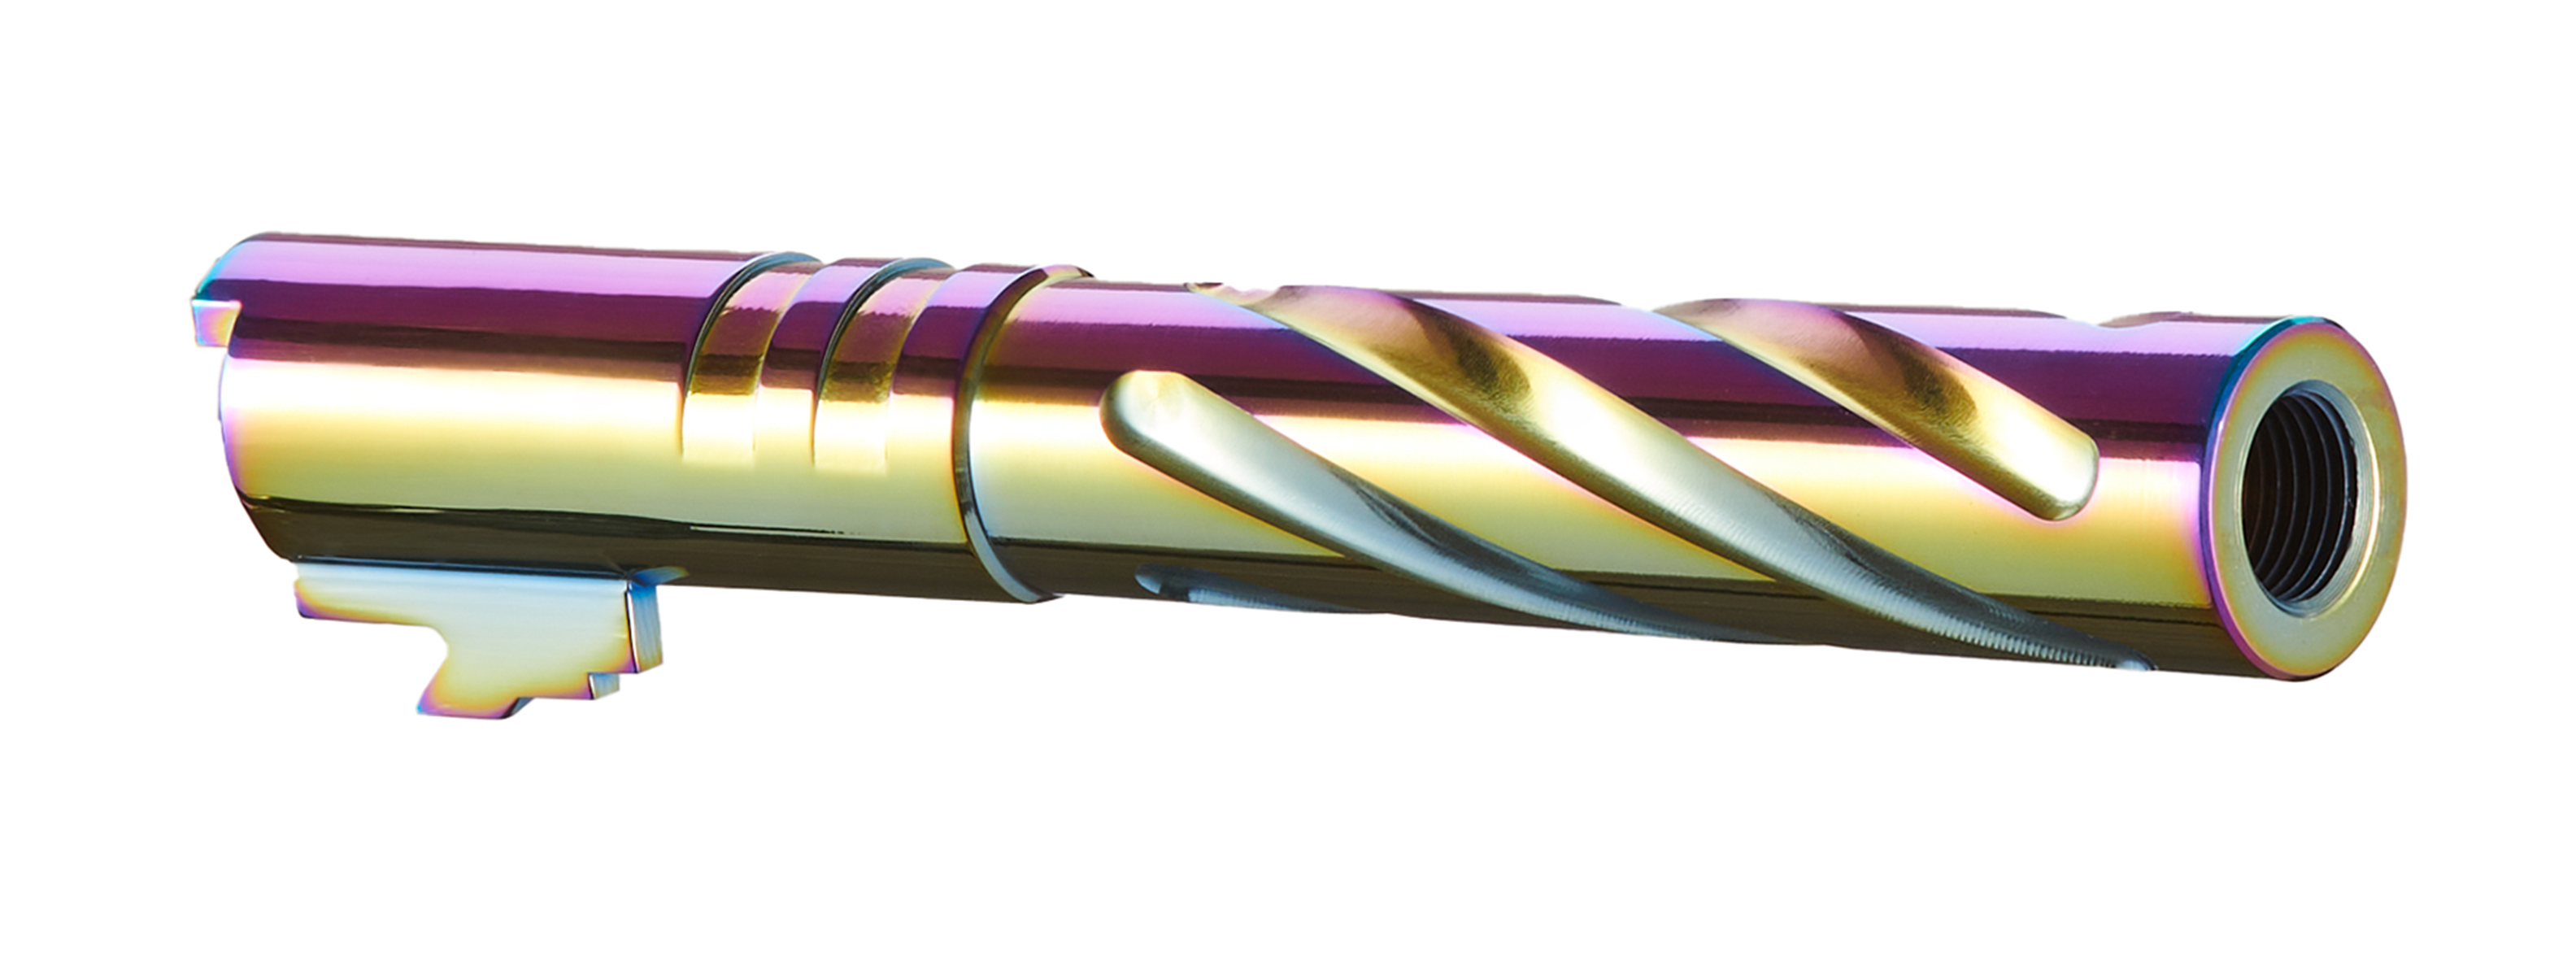 Lancer Tactical Stainless Steel Fluted Threaded 5.1 Outer Barrel (Color: Rainbow)